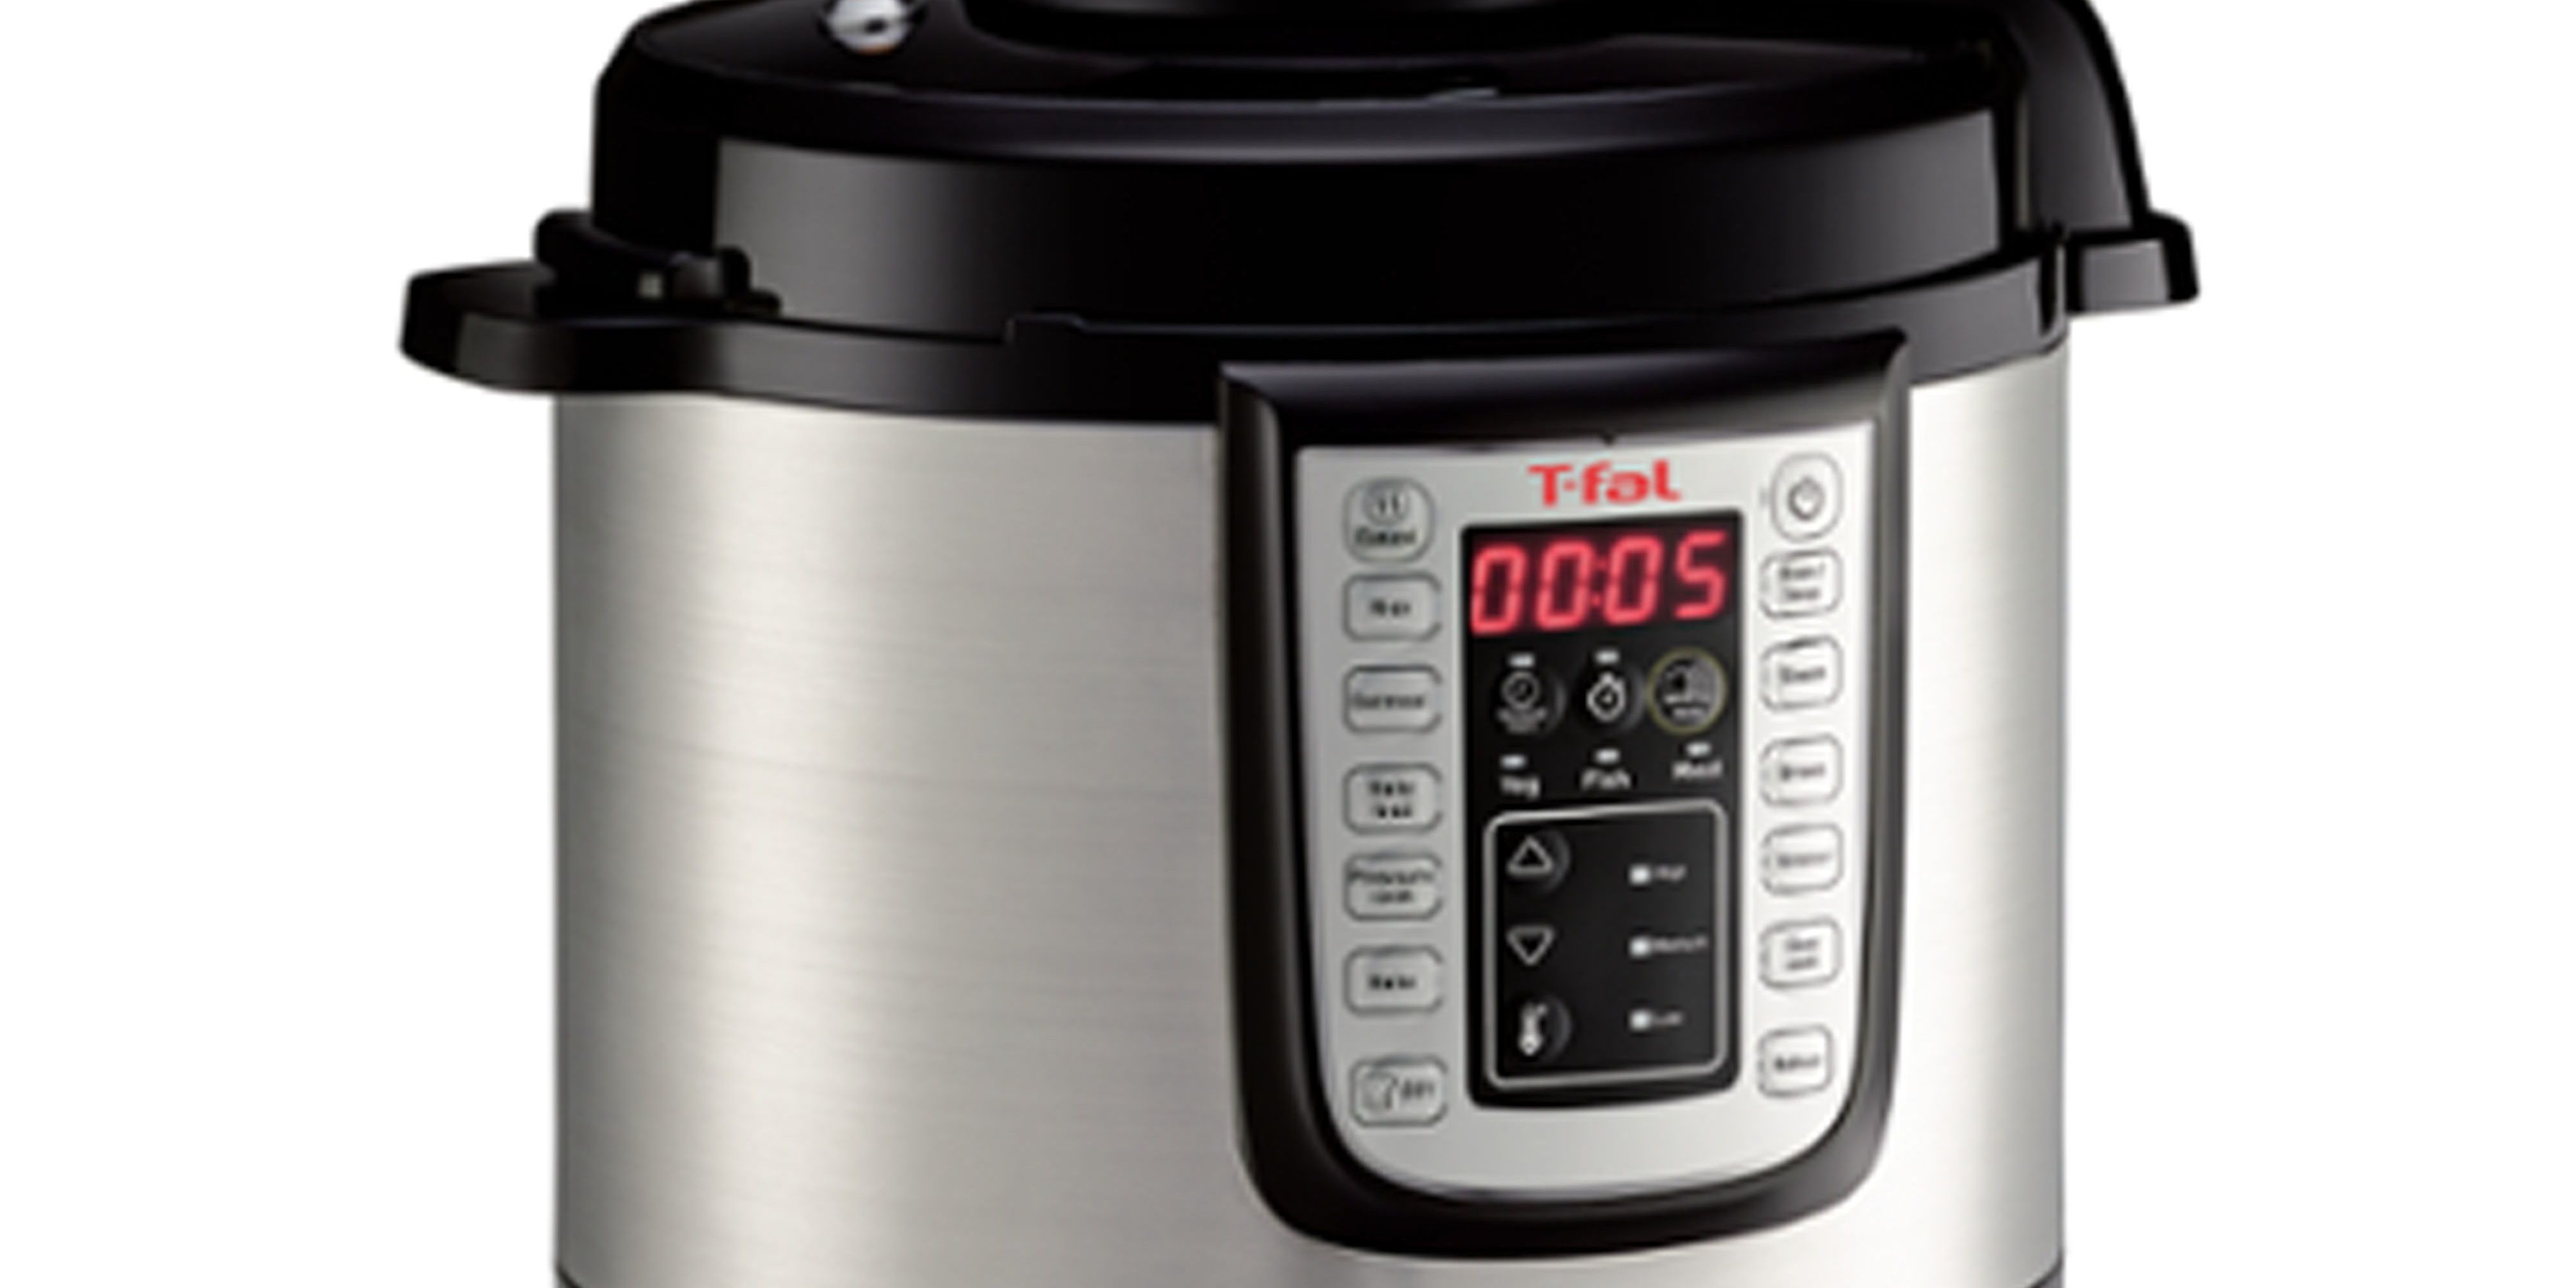 T-FAL Electric Pressure Cooker Review, Price and Features - Pros 